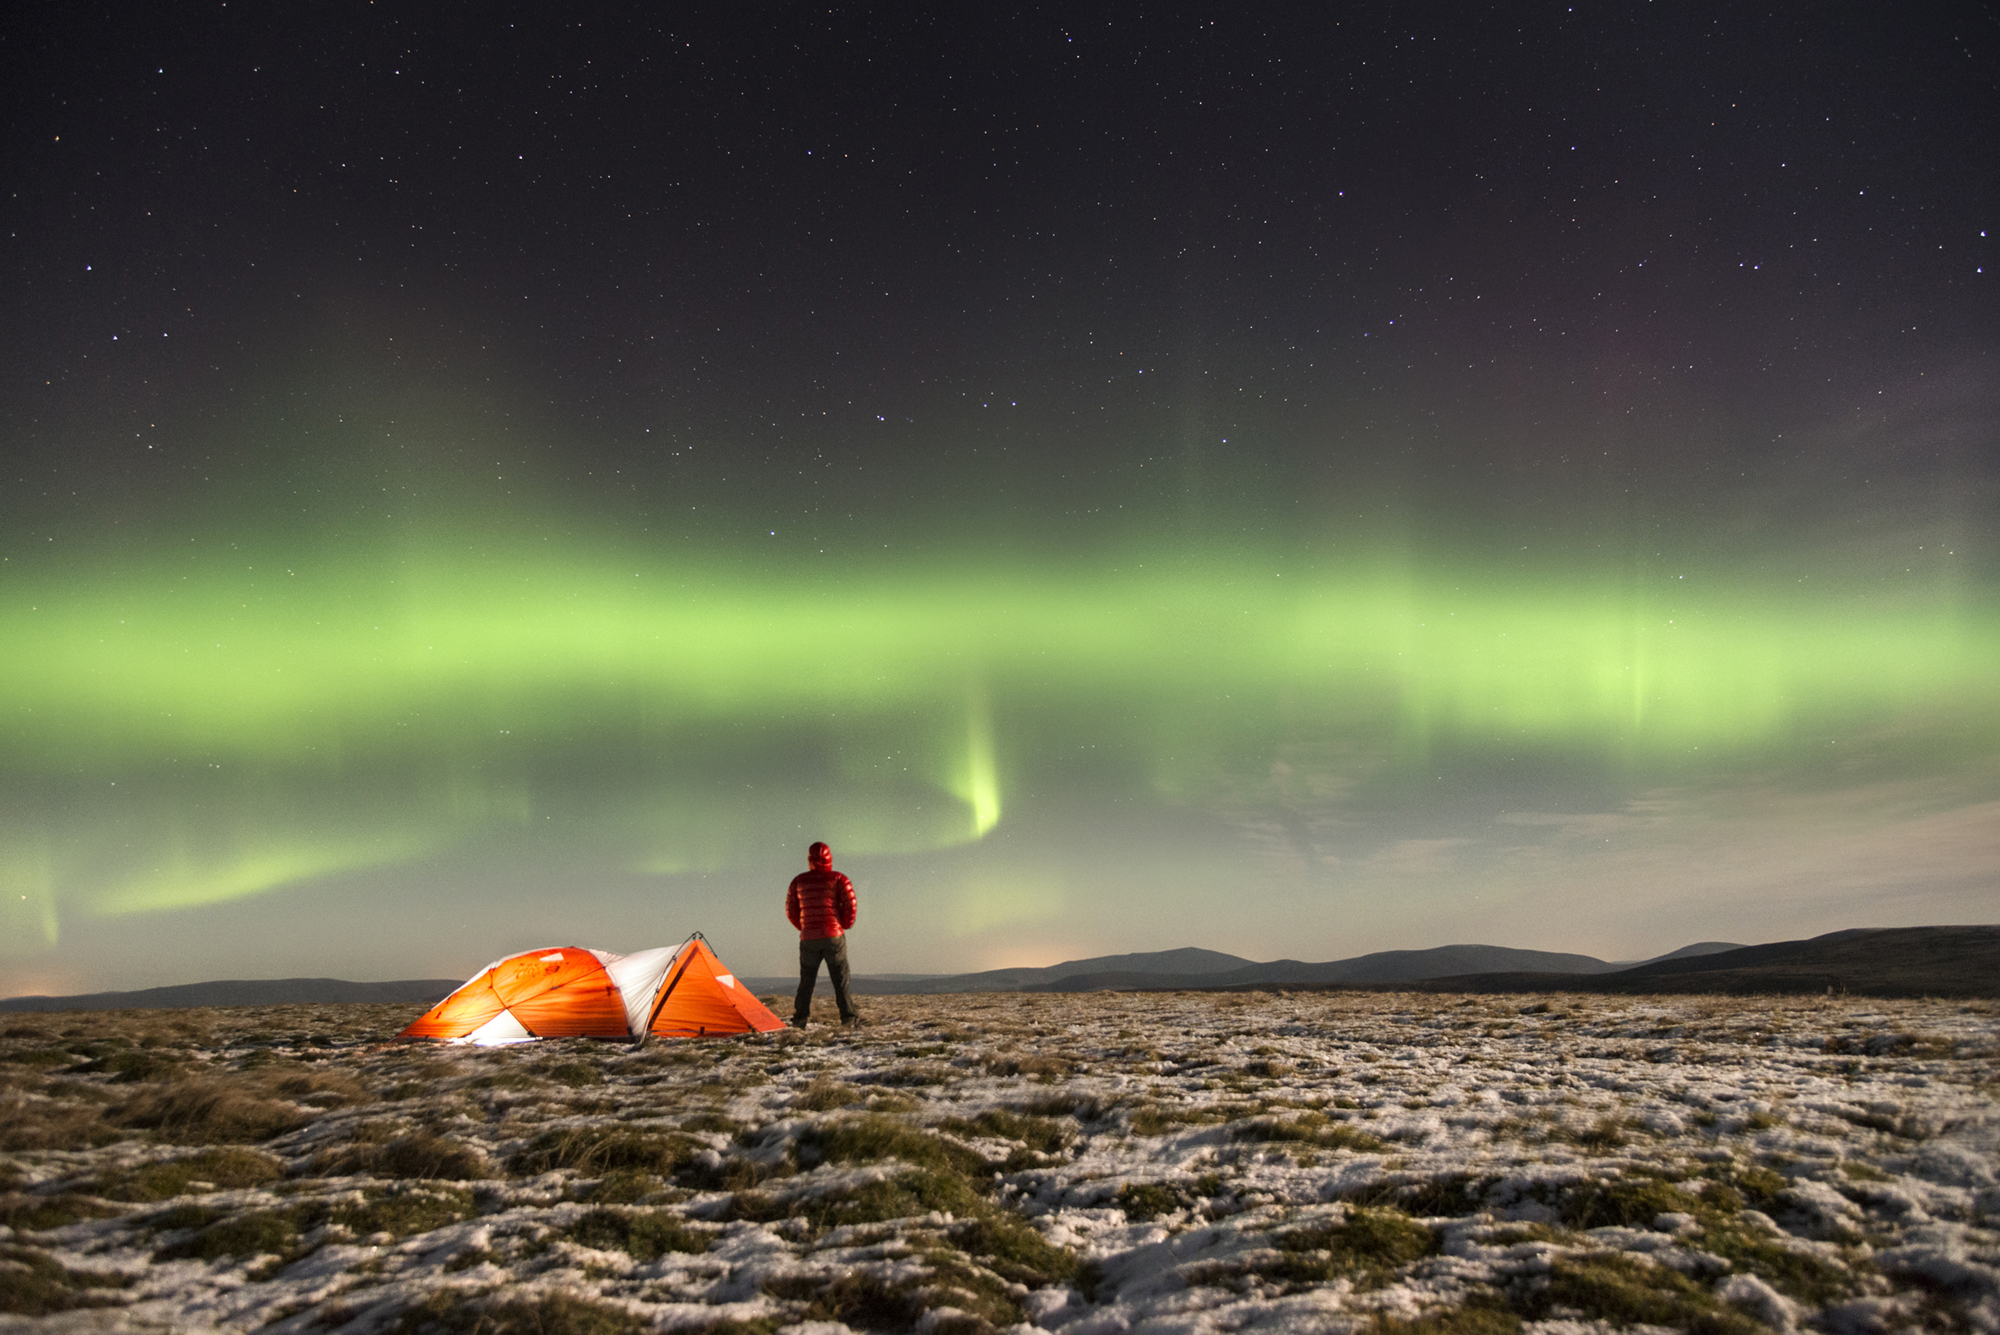 Northern lights are visible on clear nights in the Cairngorms.